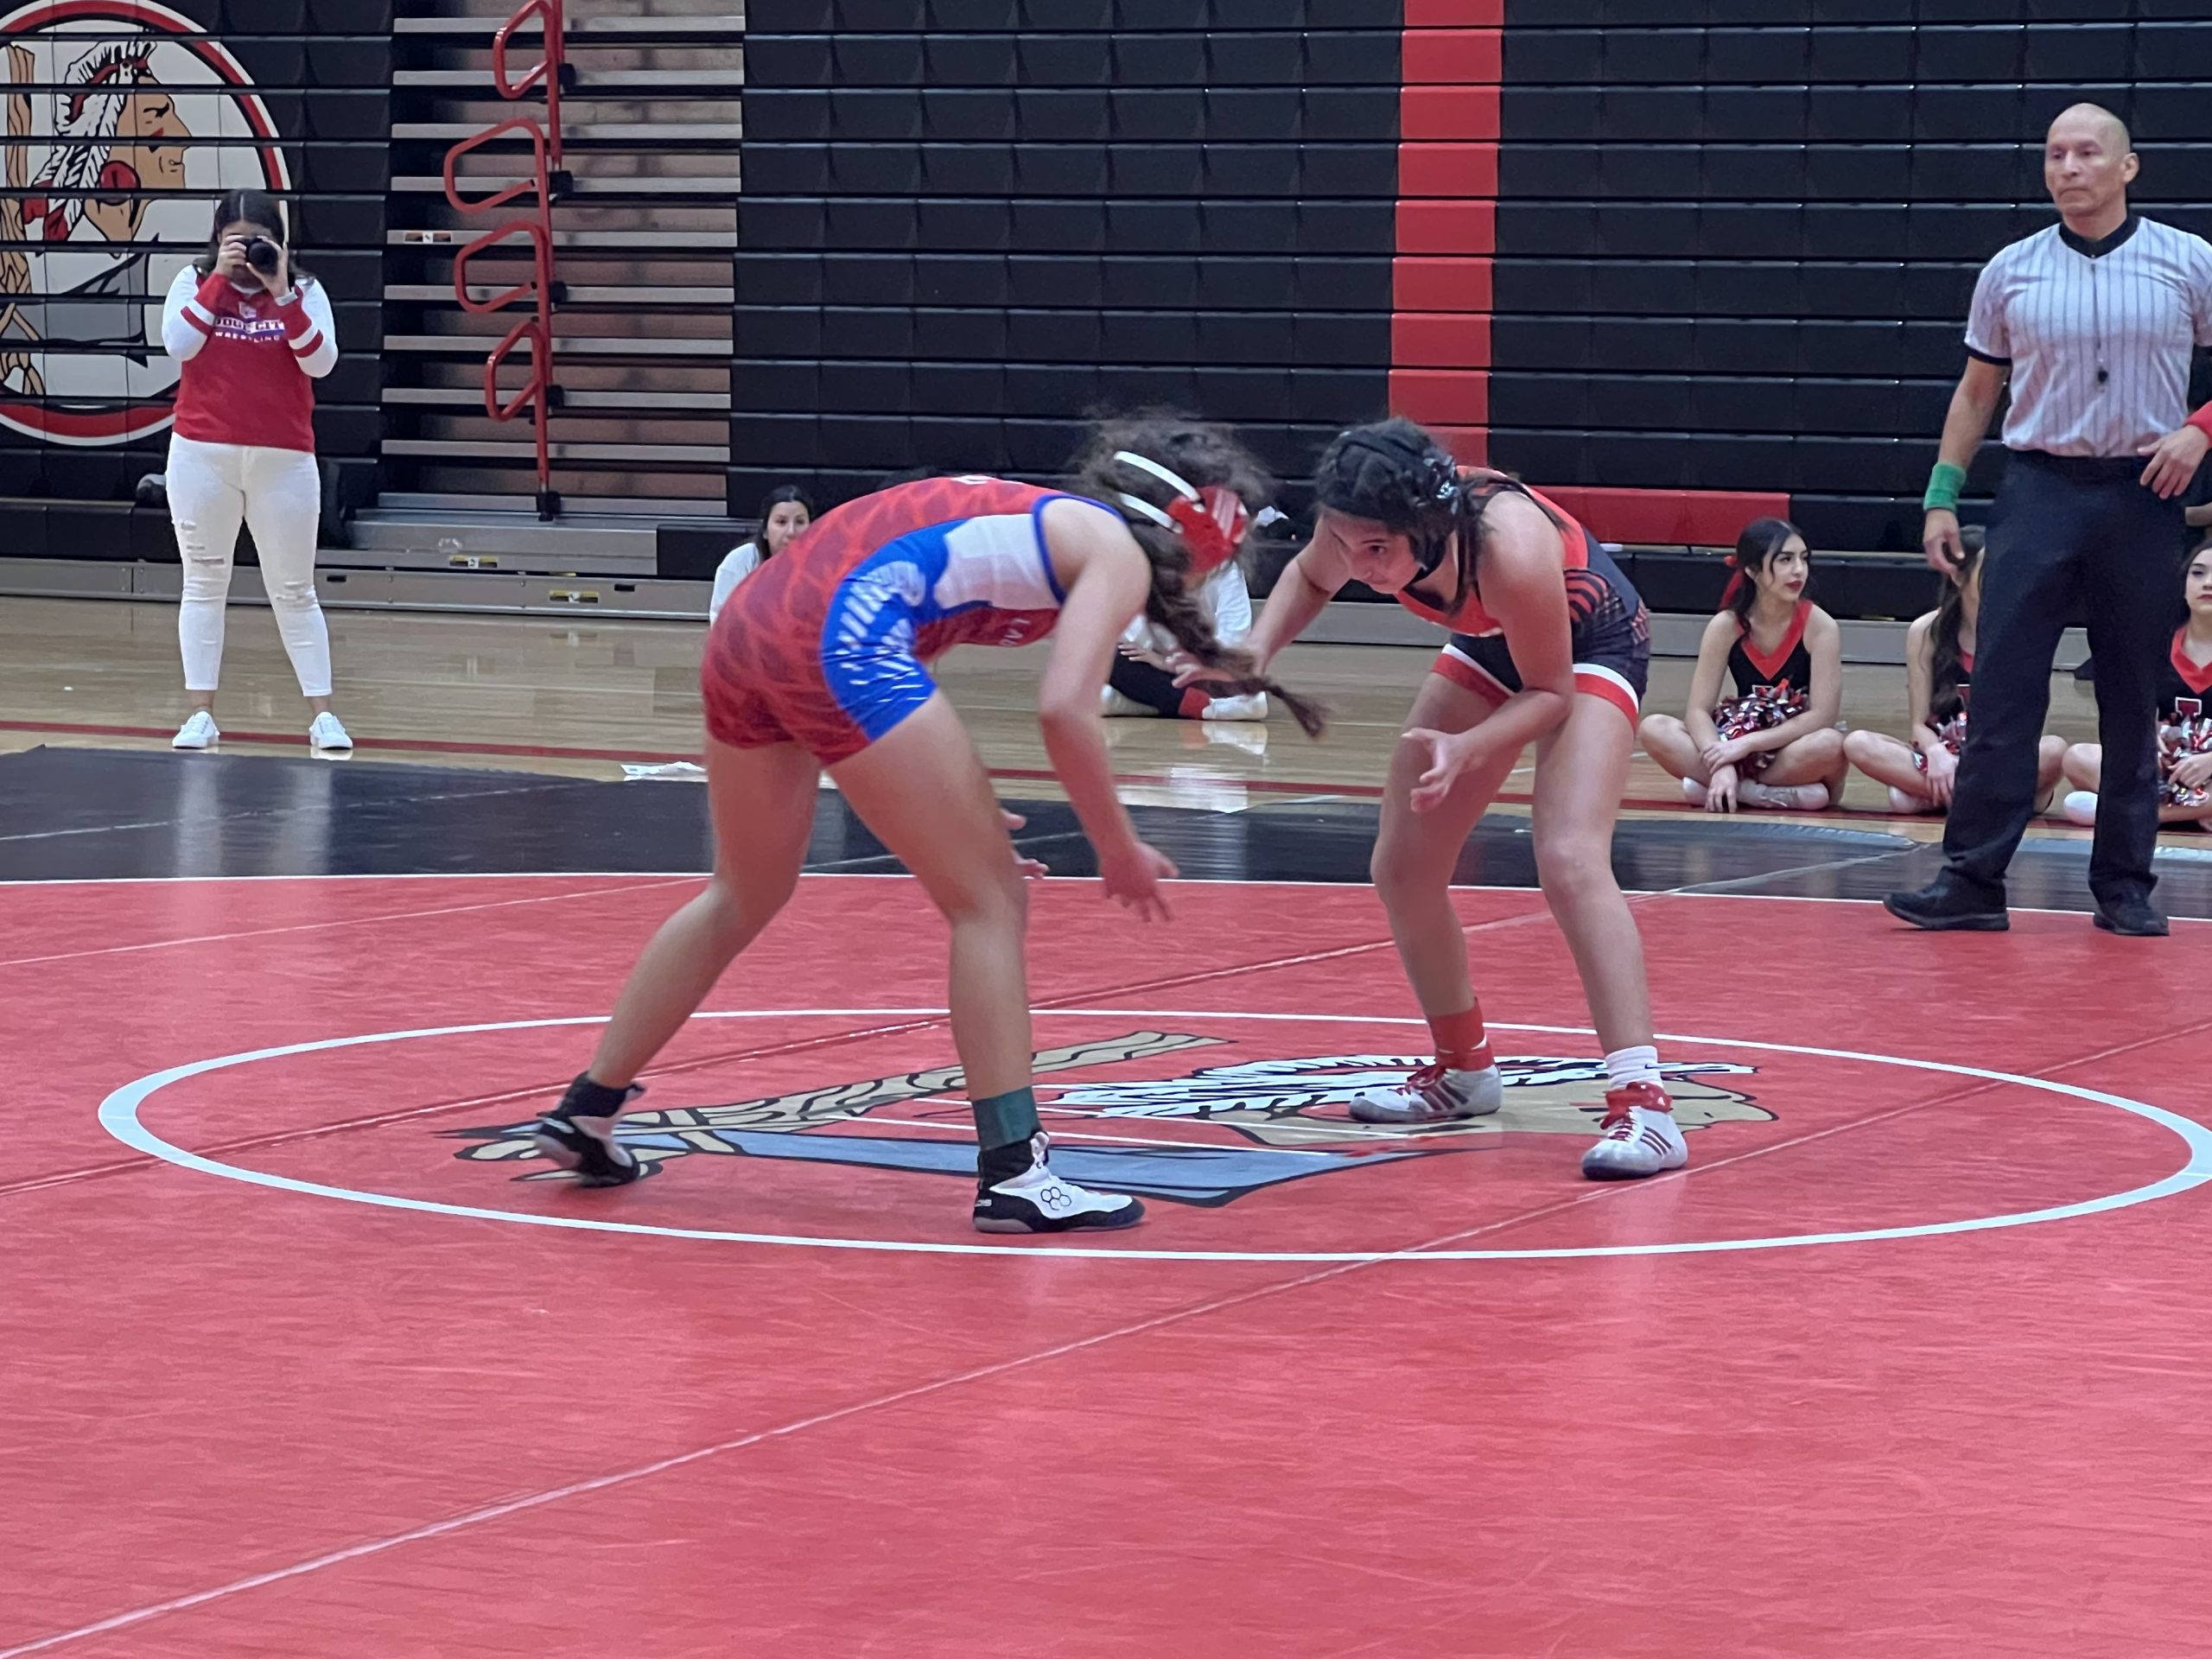 Dodge City Dominates Dual with Redskins